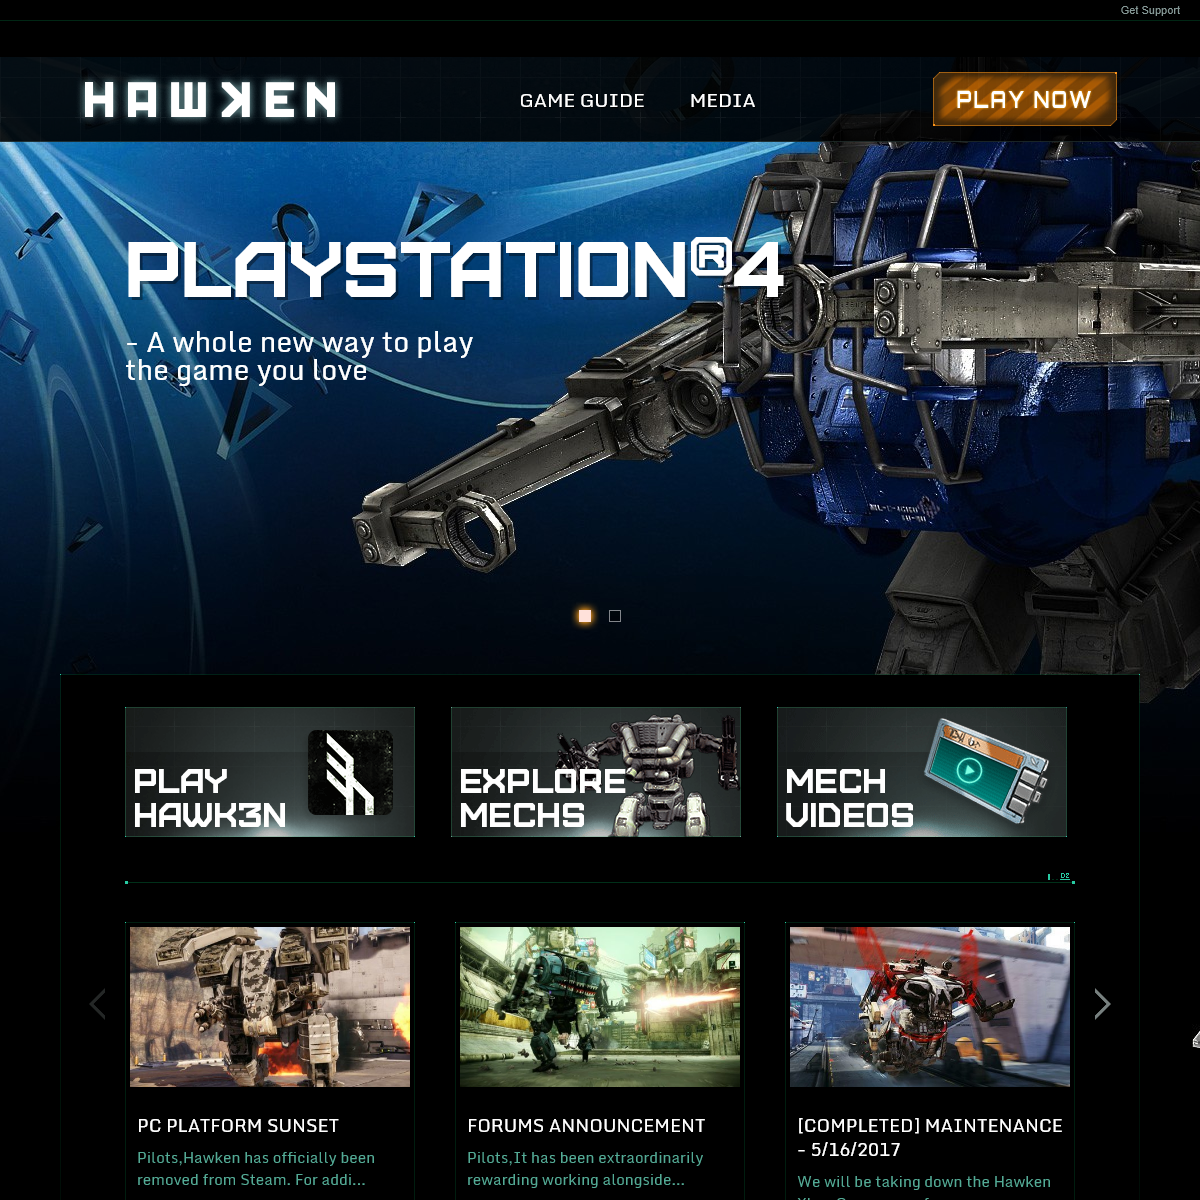 A complete backup of playhawken.com